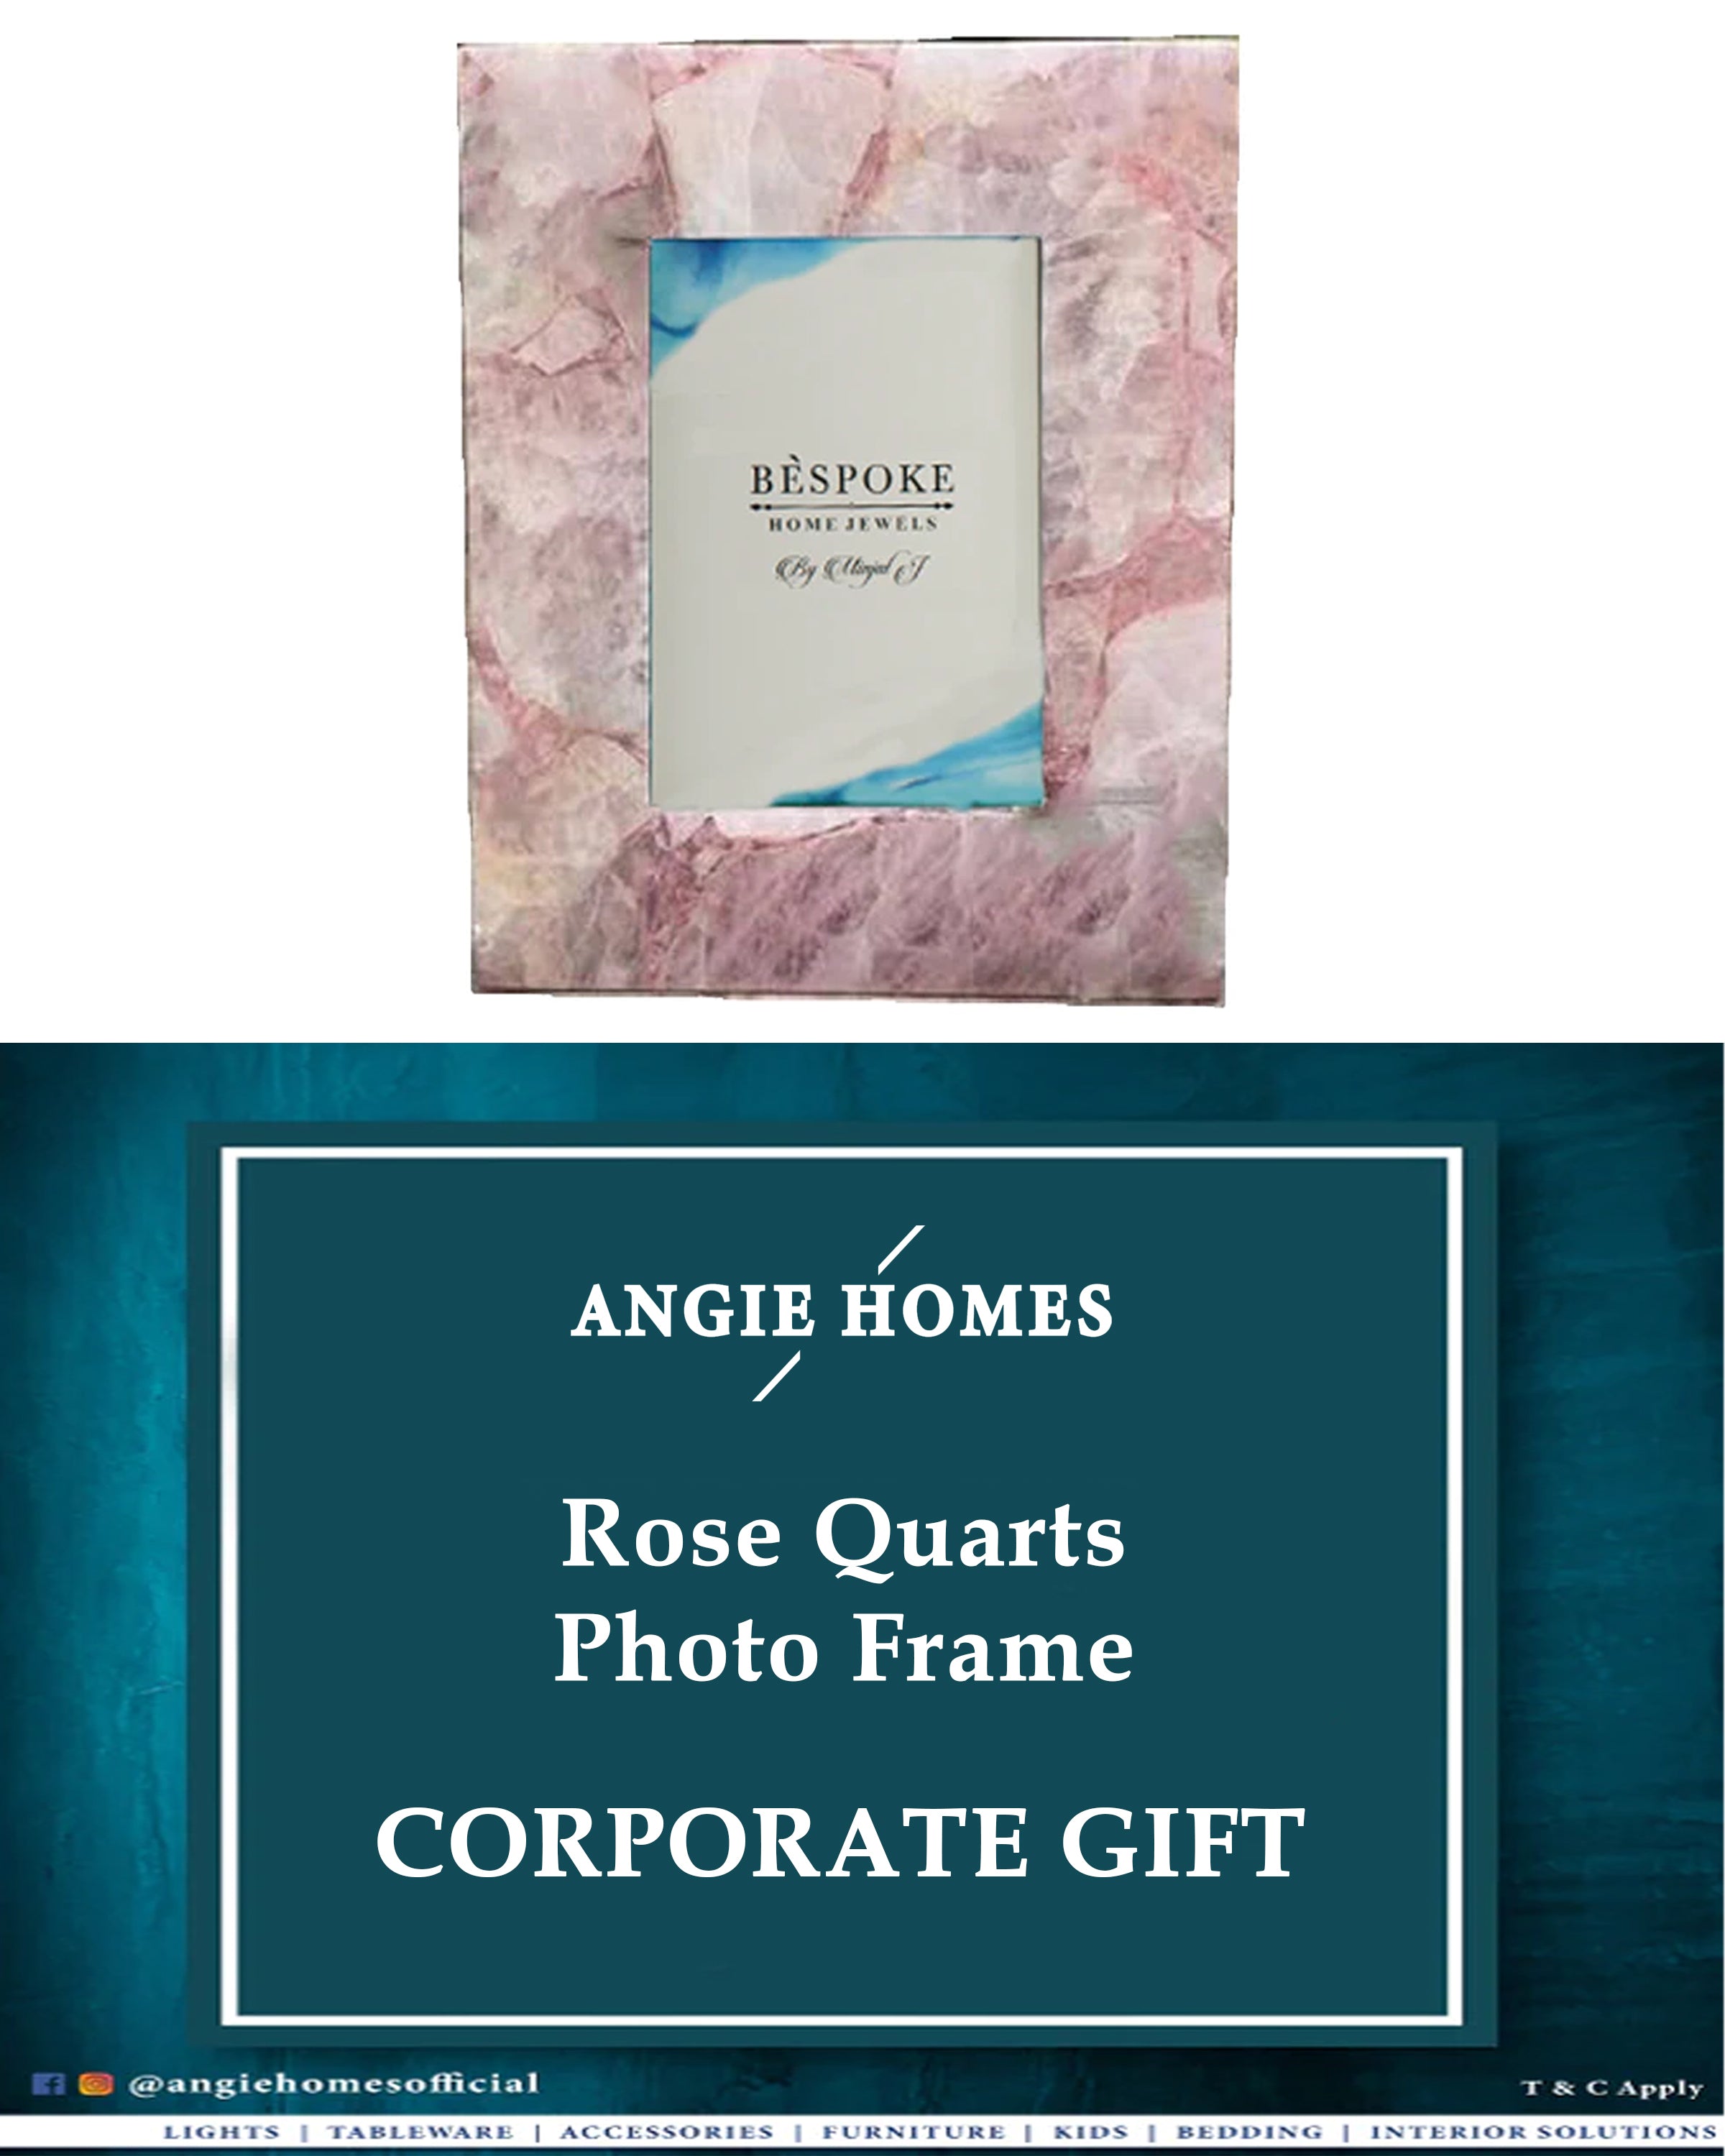 Rose Quarts Photo Frame for Weddings, House Warming & Corporate Gift ANGIE HOMES